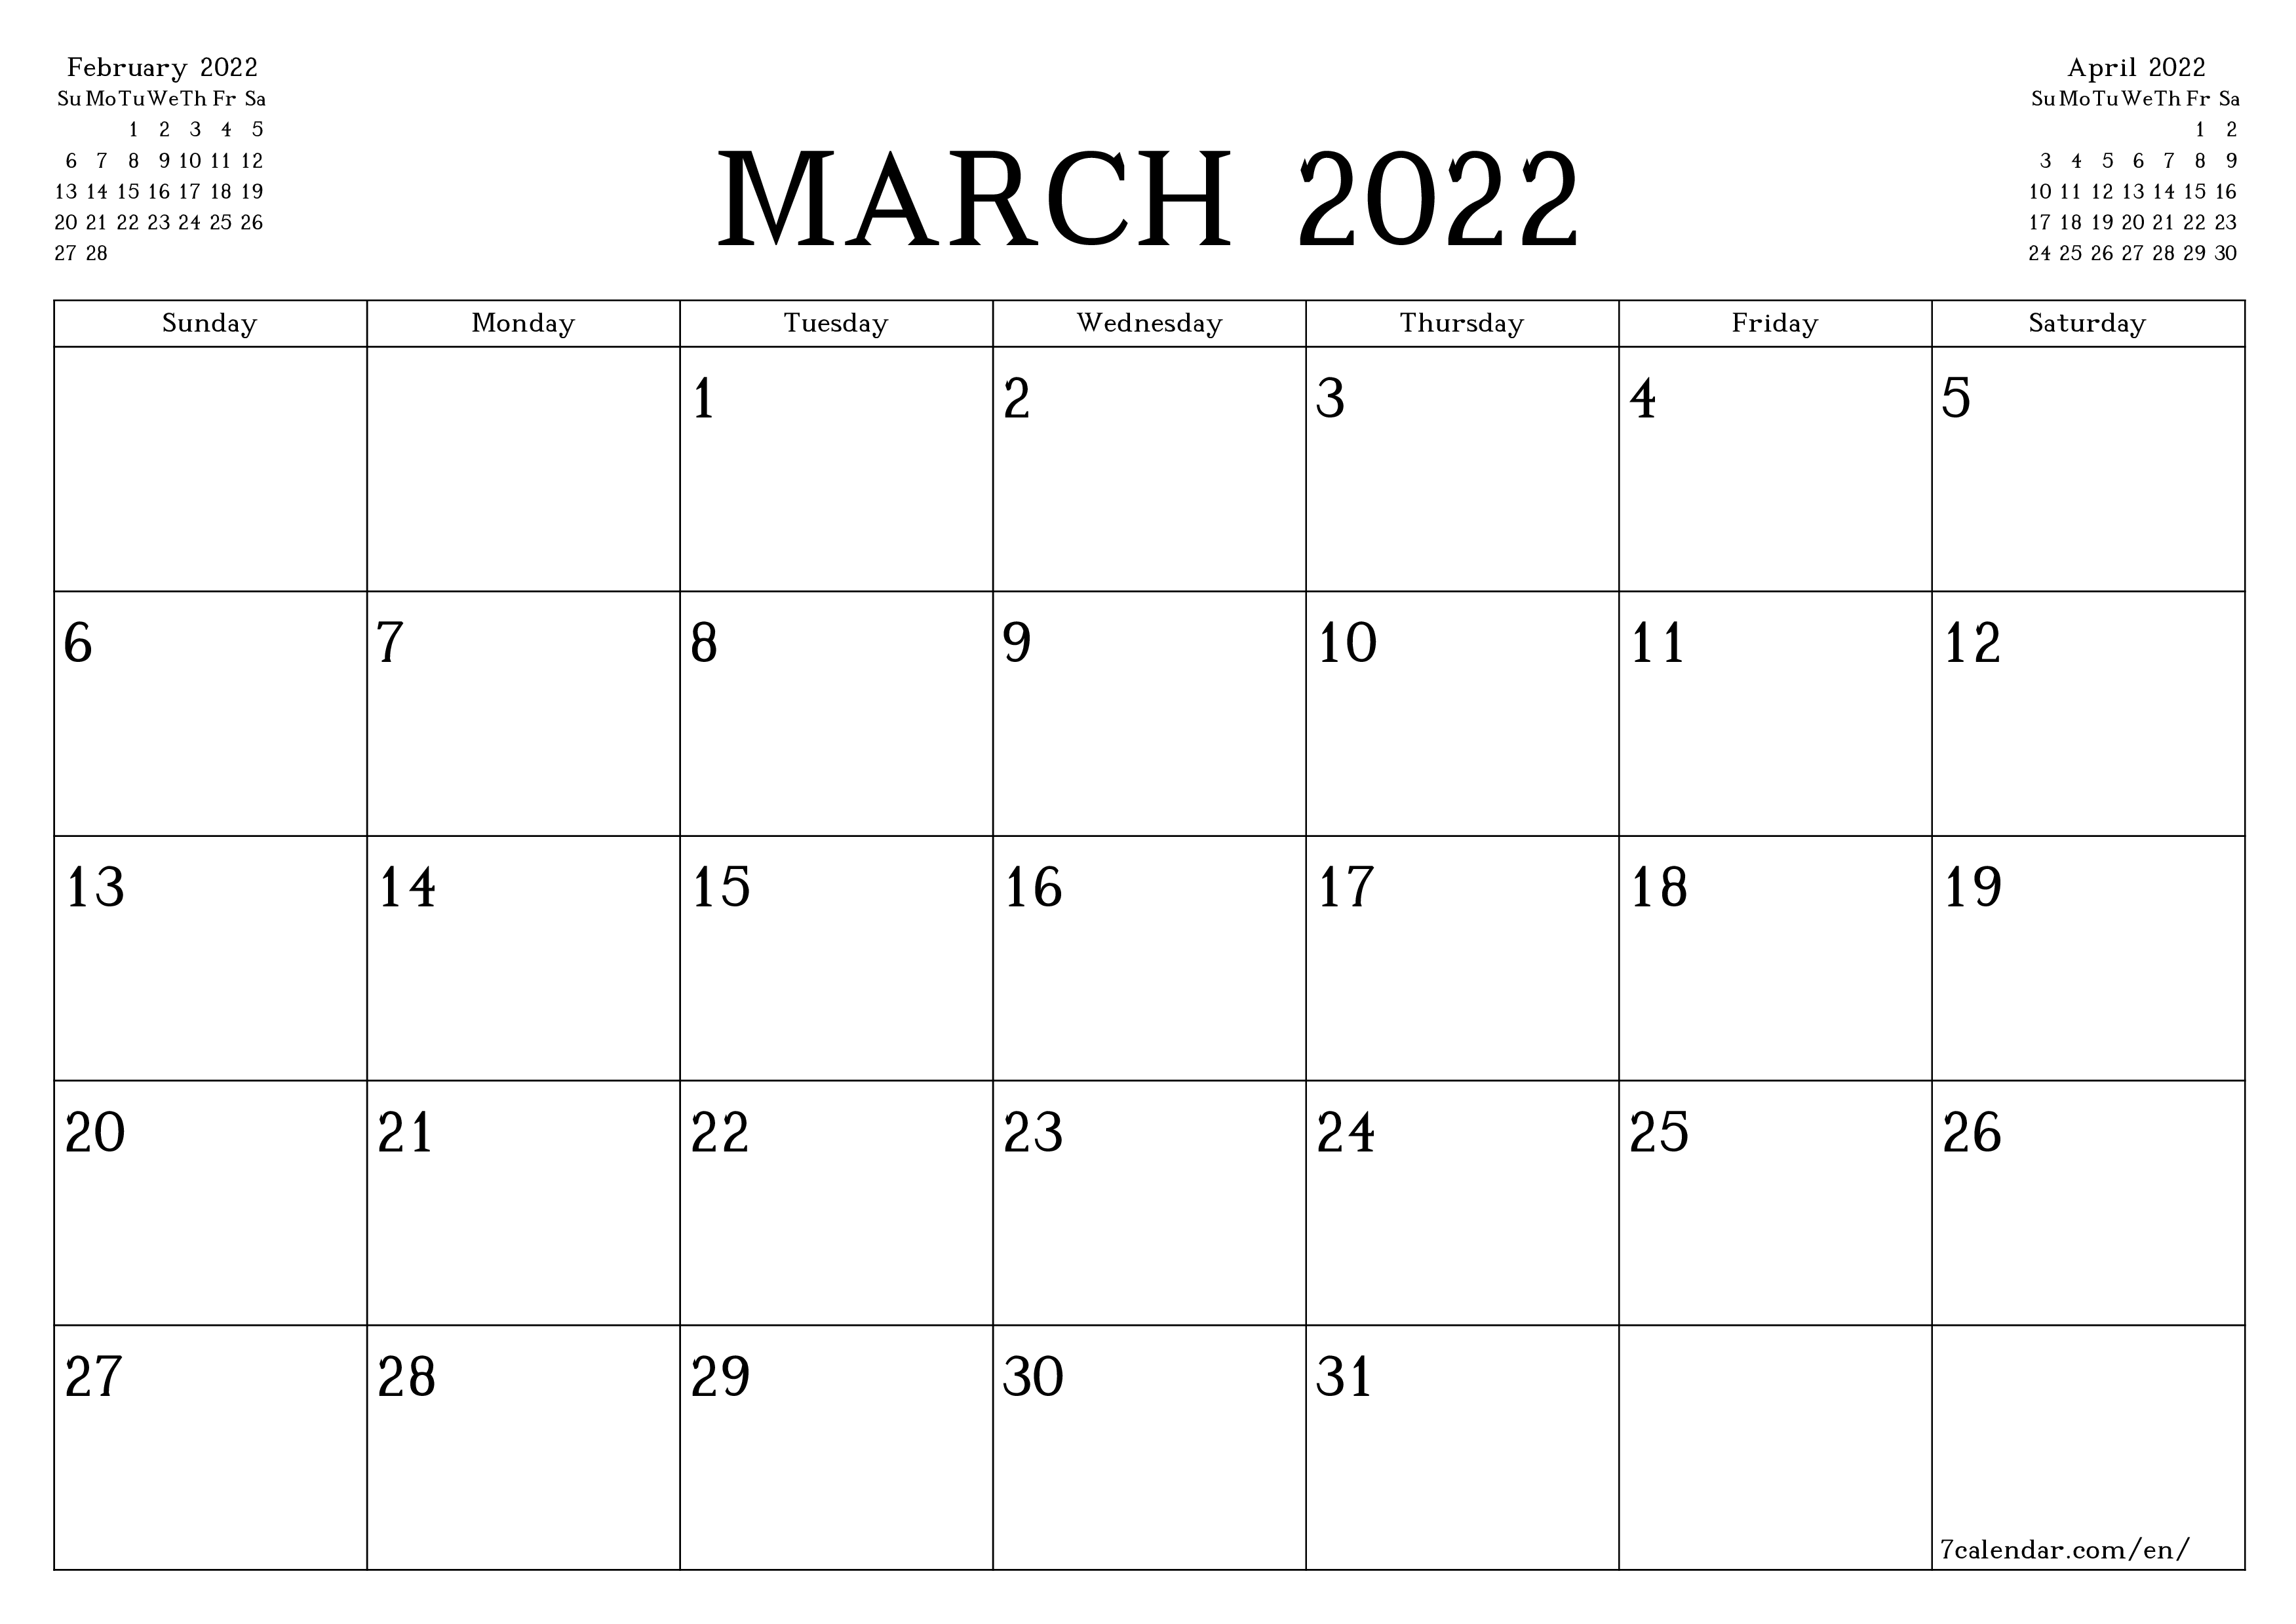 Print Calendar March 2022 March 2022 Free Printable Calendars And Planners, Pdf Templates - 7Calendar